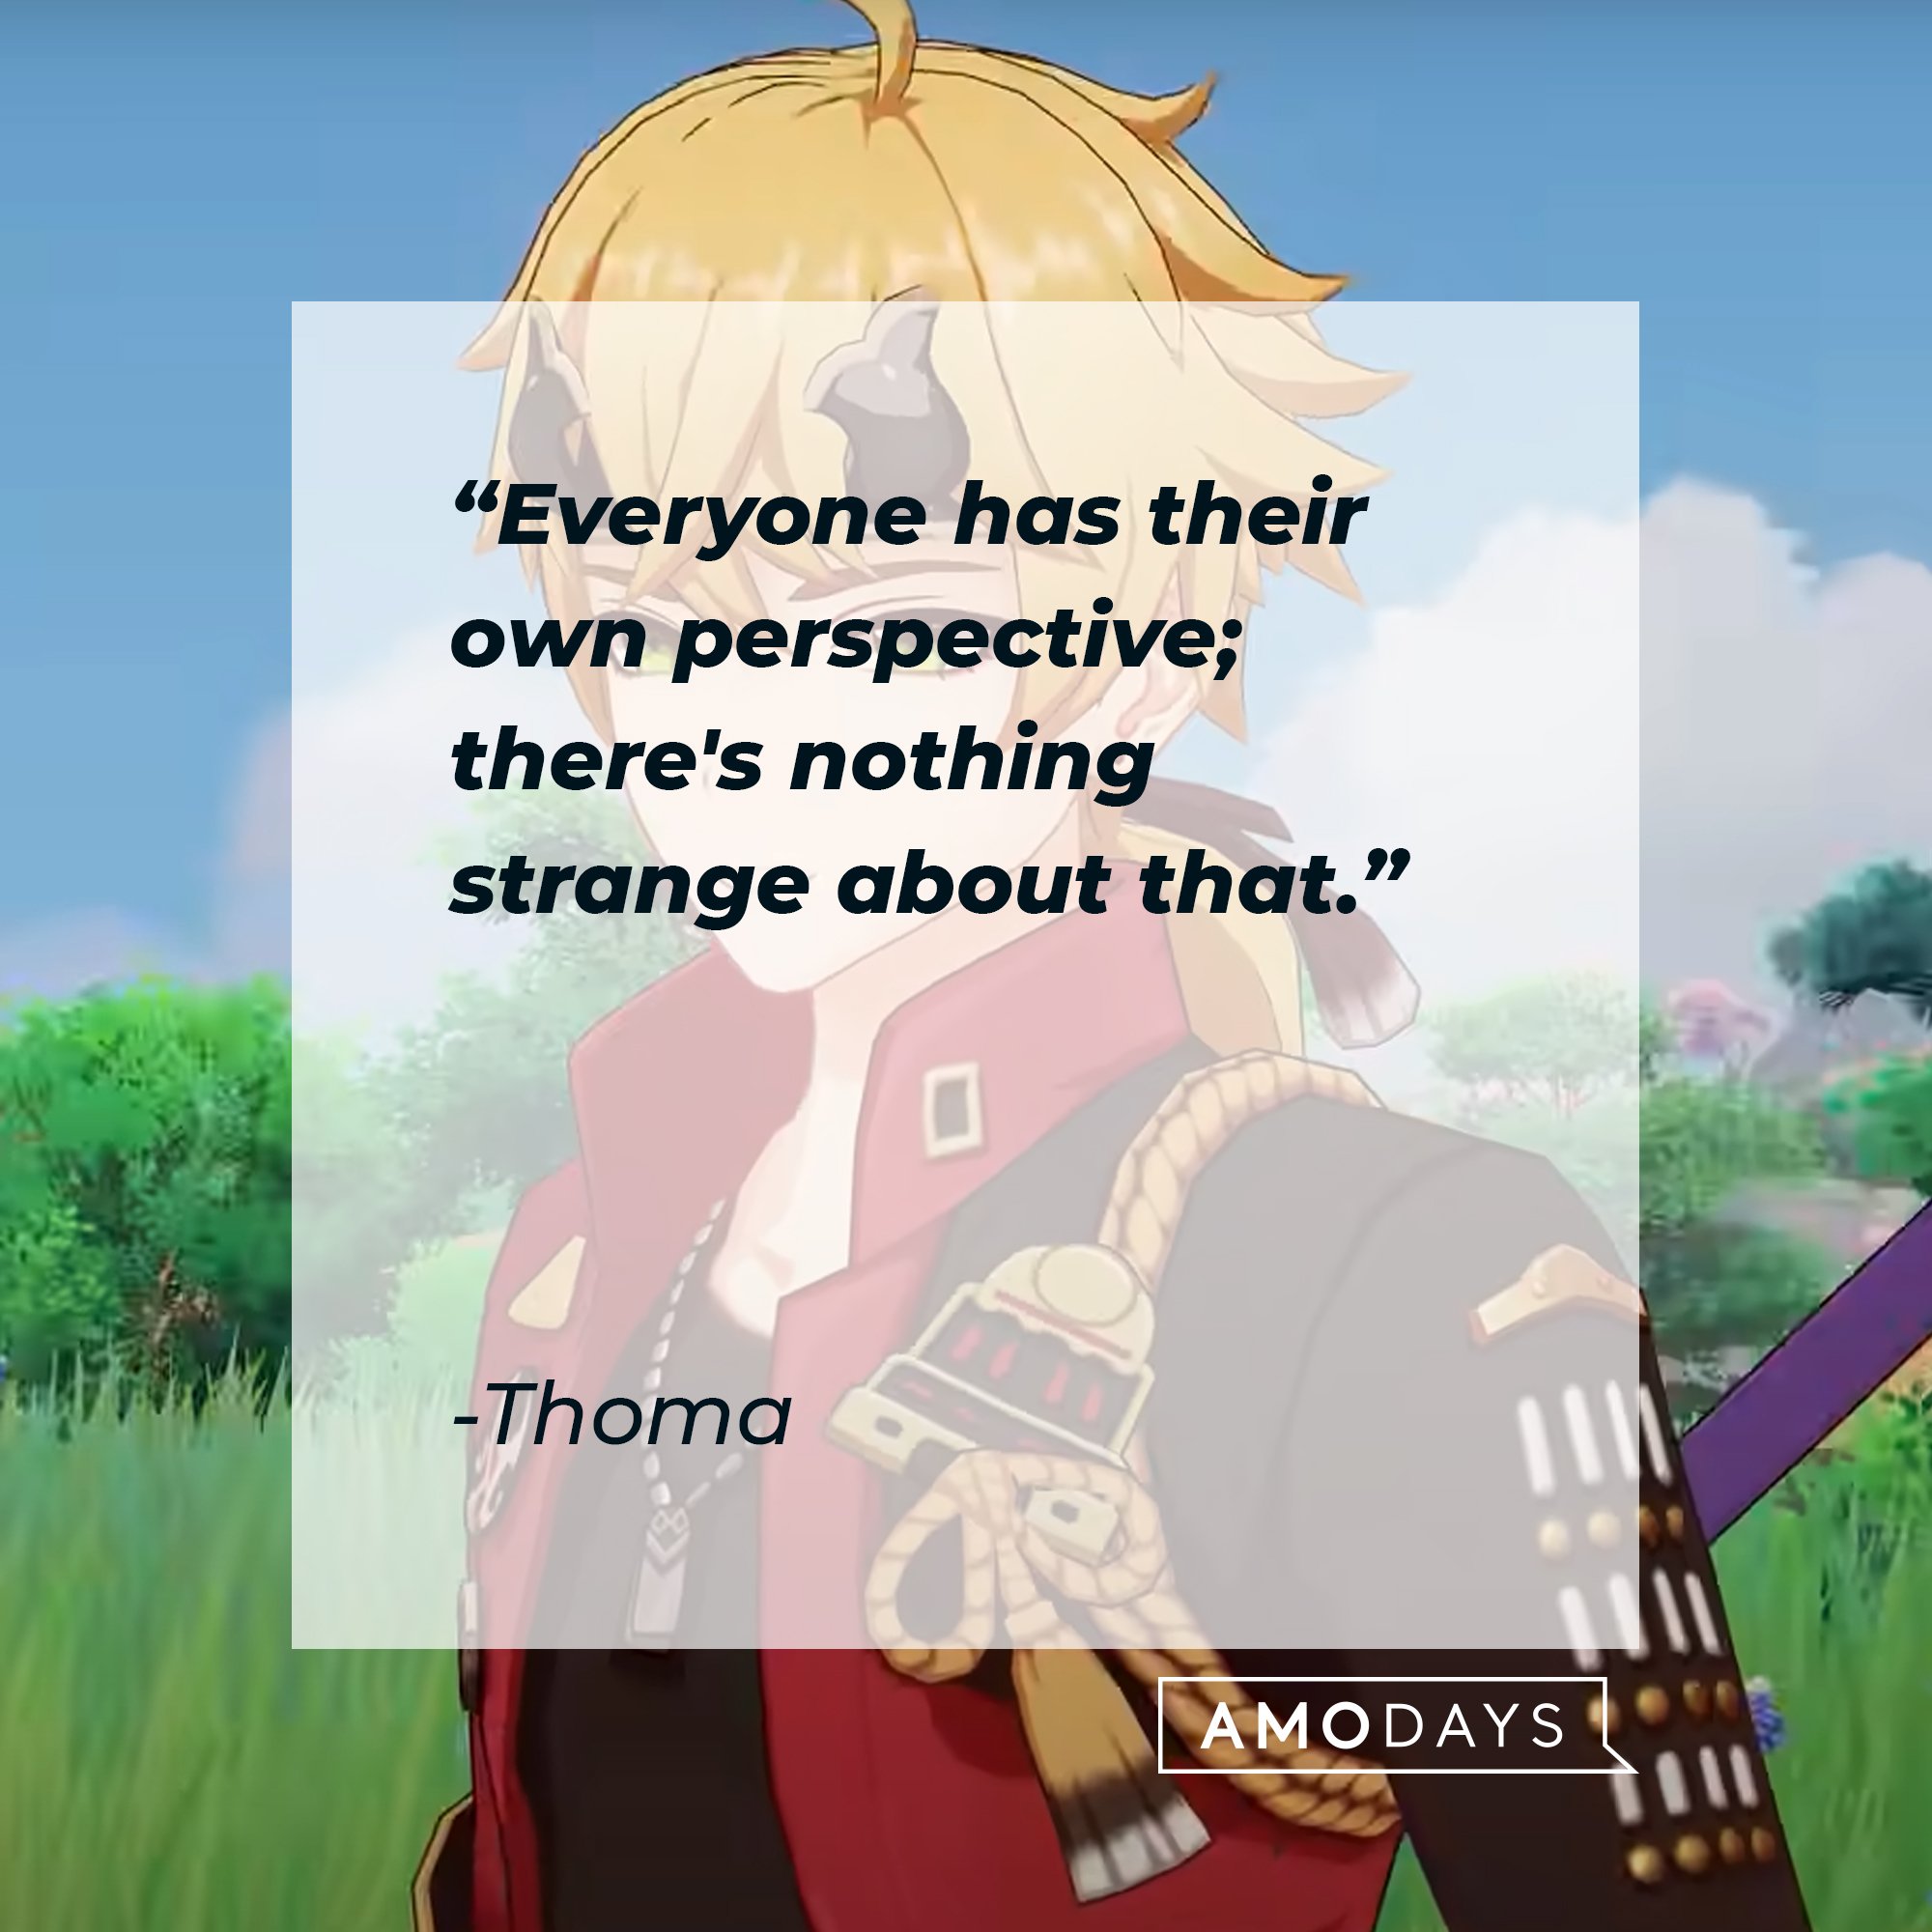 Thoma’s quote: "Everyone has their own perspective; there's nothing strange about that." | Image: AmoDays